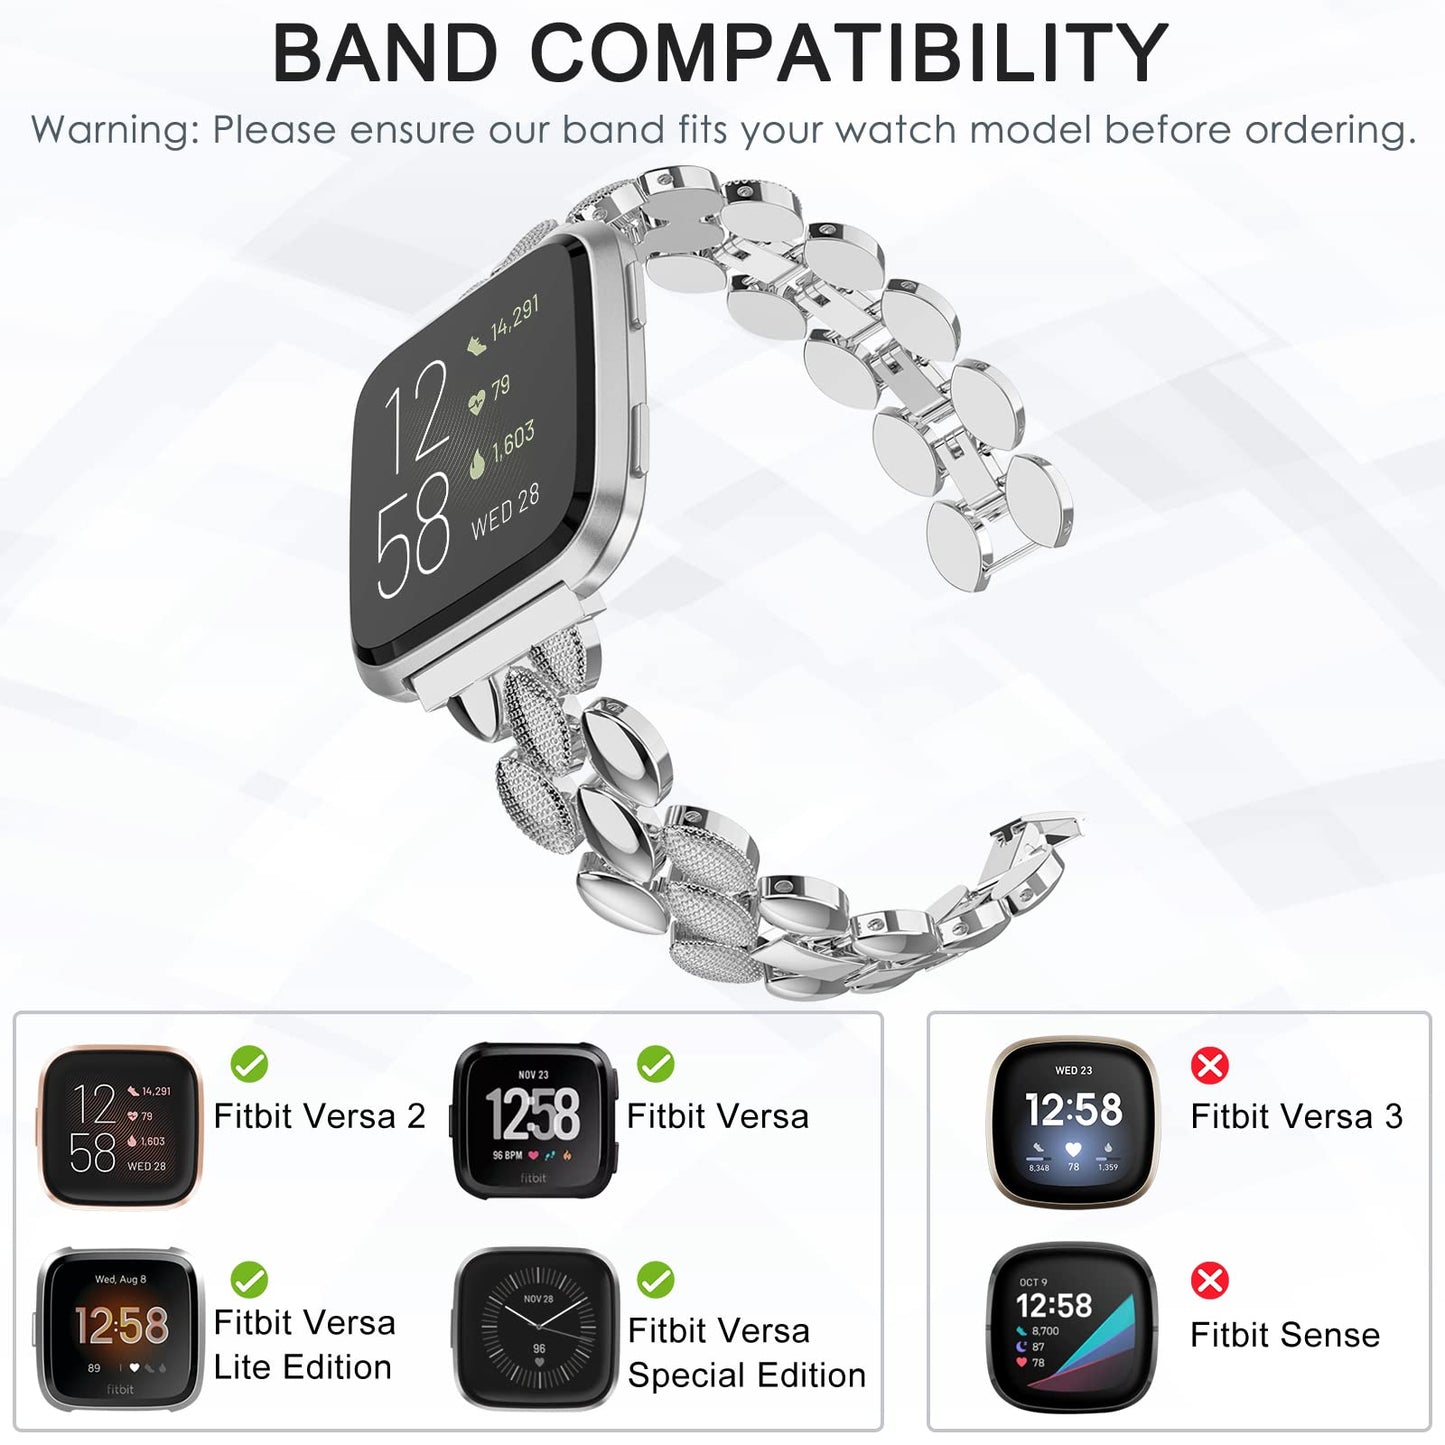 TOYOUTHS Metal Link Compatible with Fitbit Versa/Versa 2/Versa Lite Special Edition Bands Women Men Stylish Strap Bracelet Replacement Wristbands Accessories 5.5-8 inches